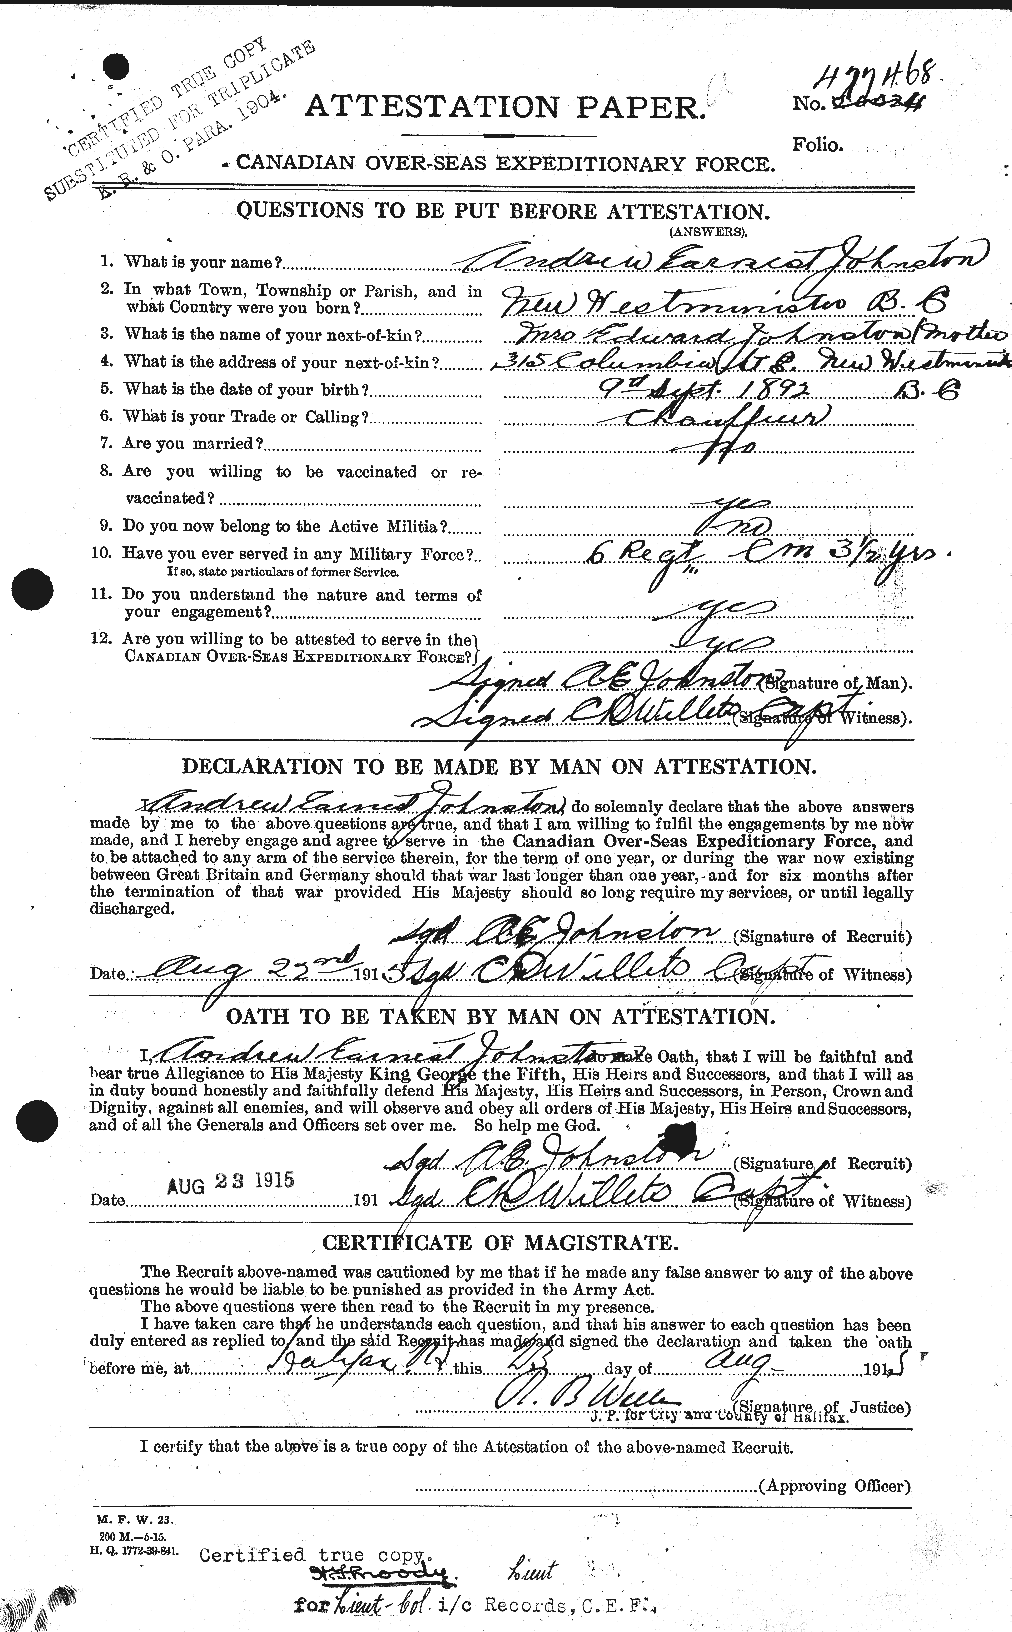 Personnel Records of the First World War - CEF 421017a